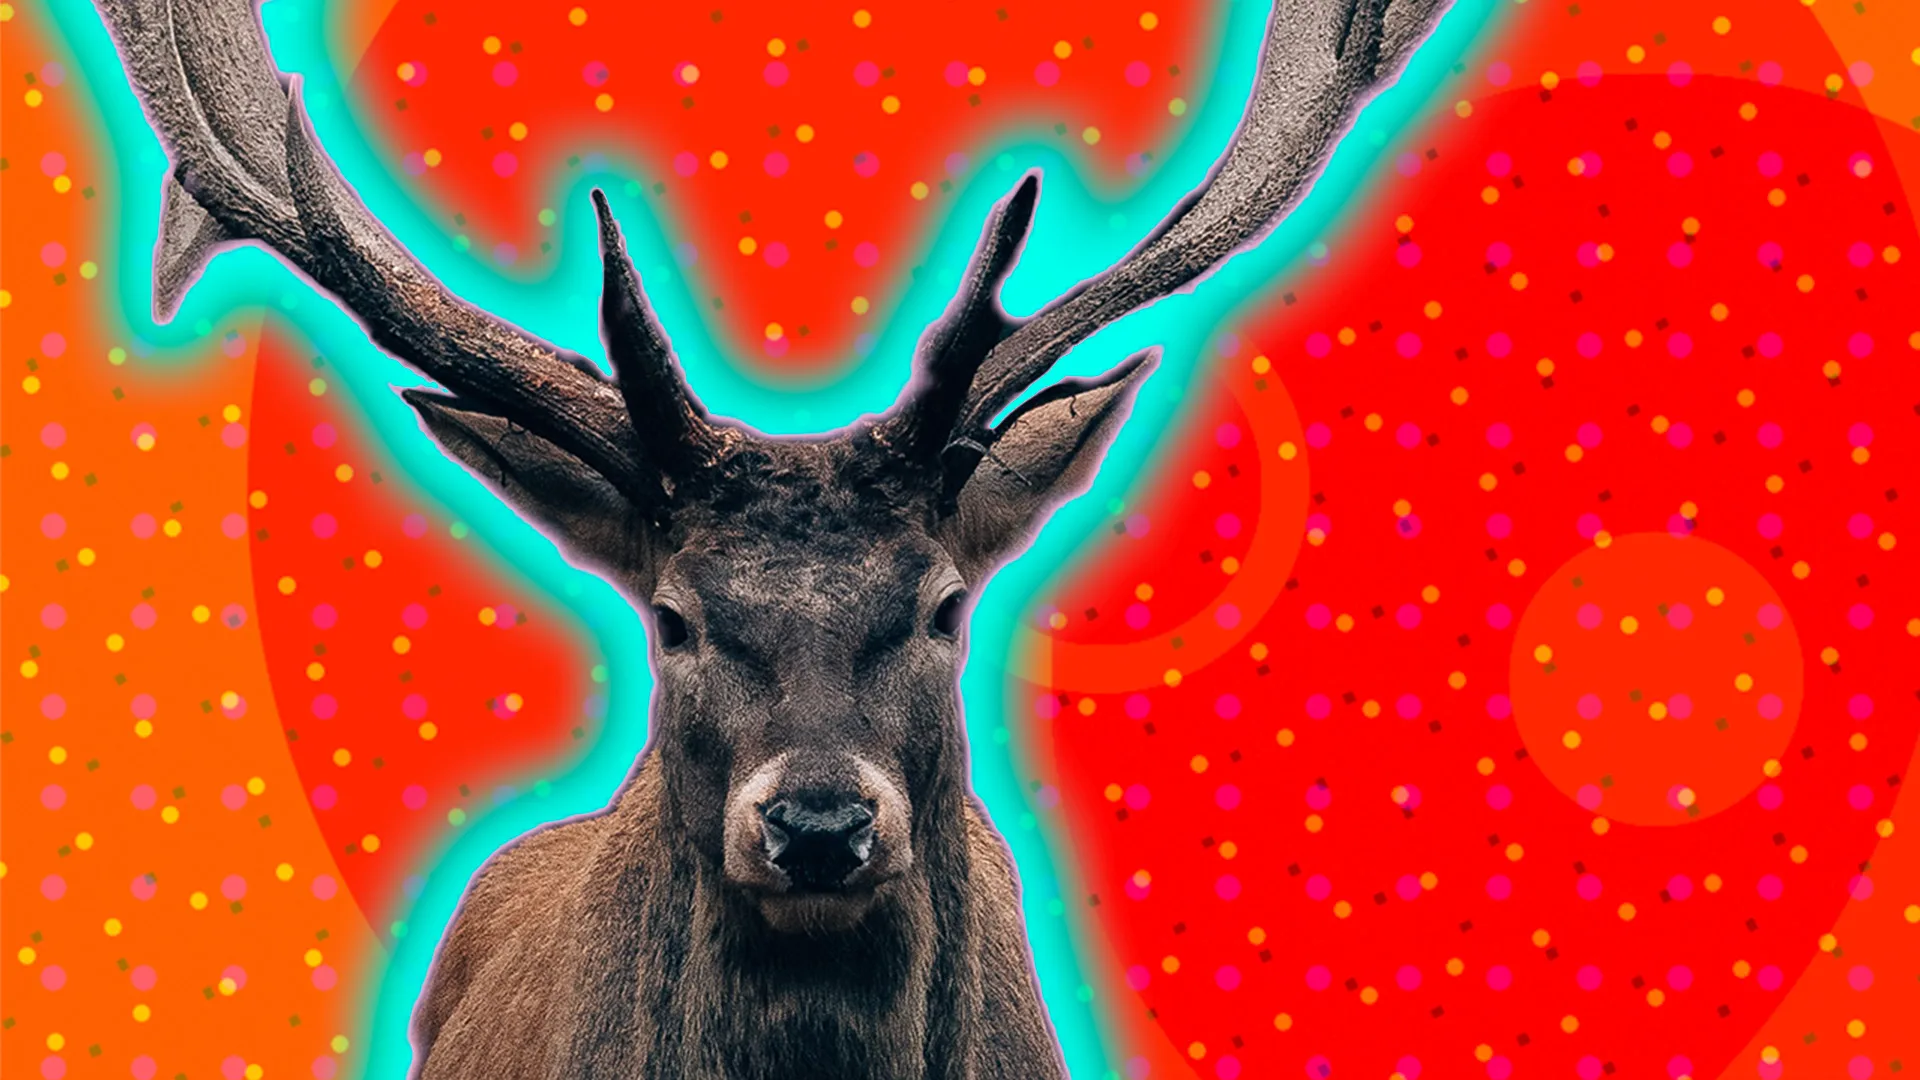 A stag outlined in a turquoise glow on an orange textured background